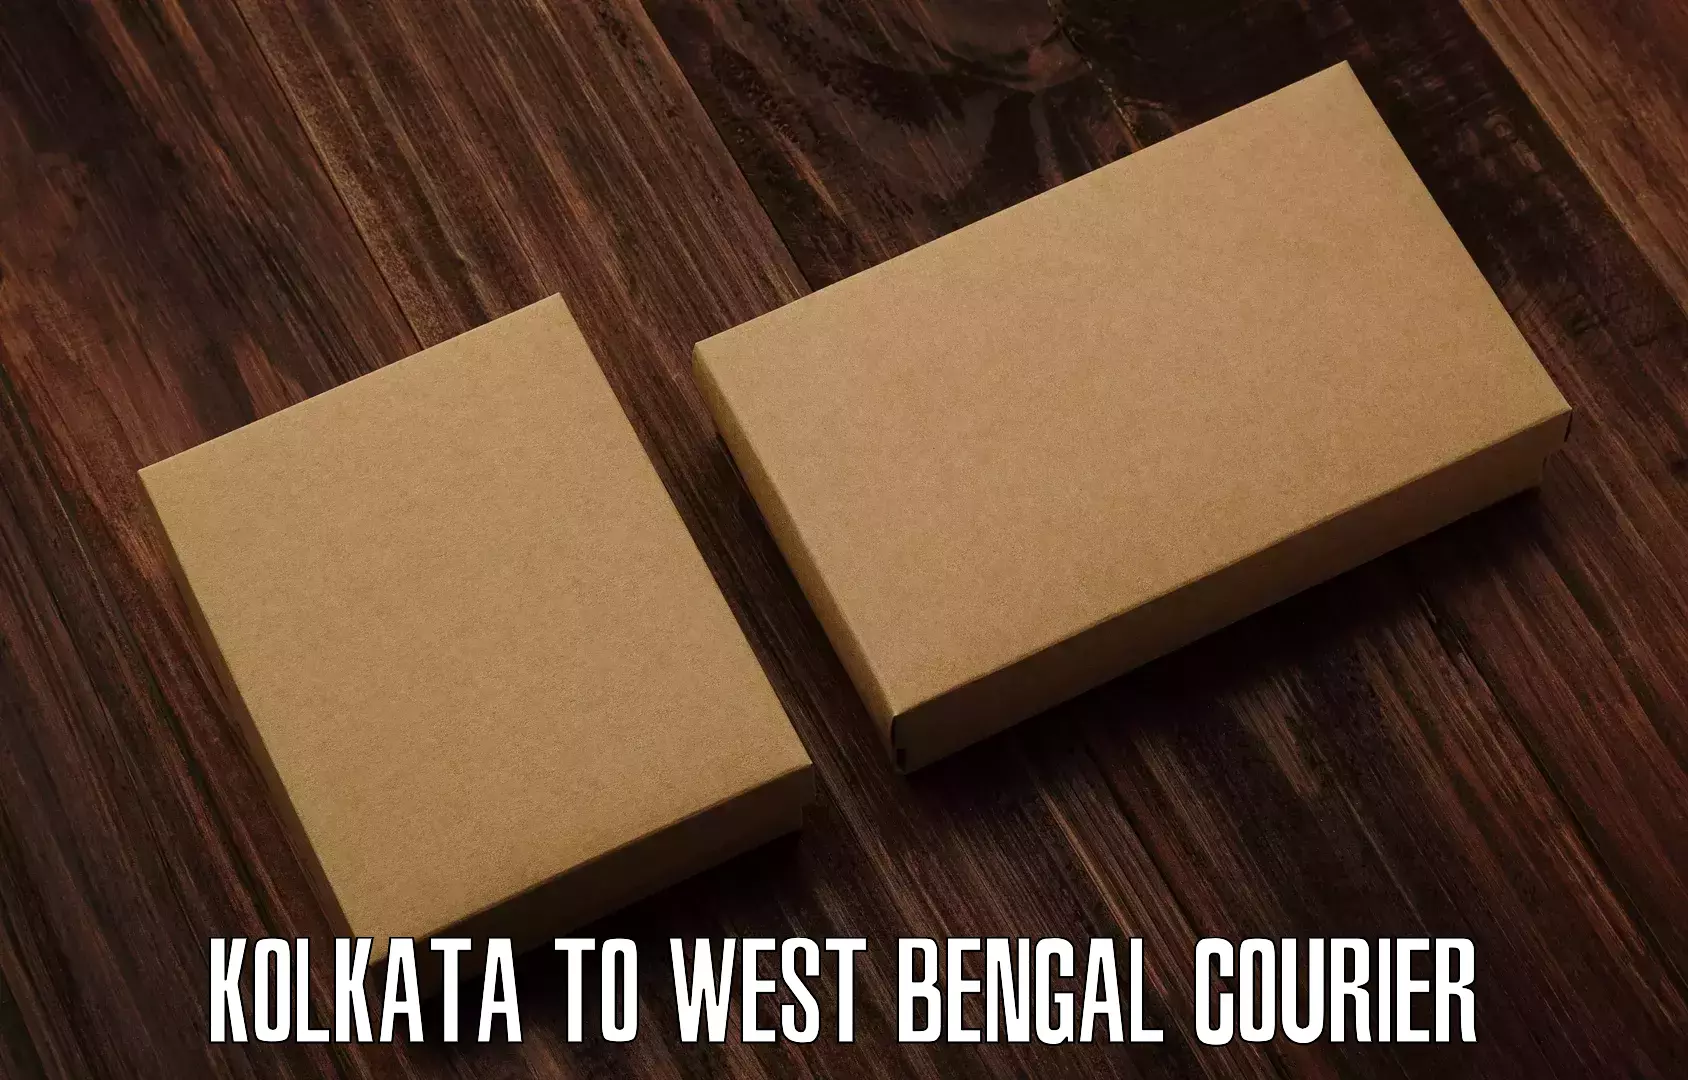 High-priority parcel service Kolkata to West Bengal